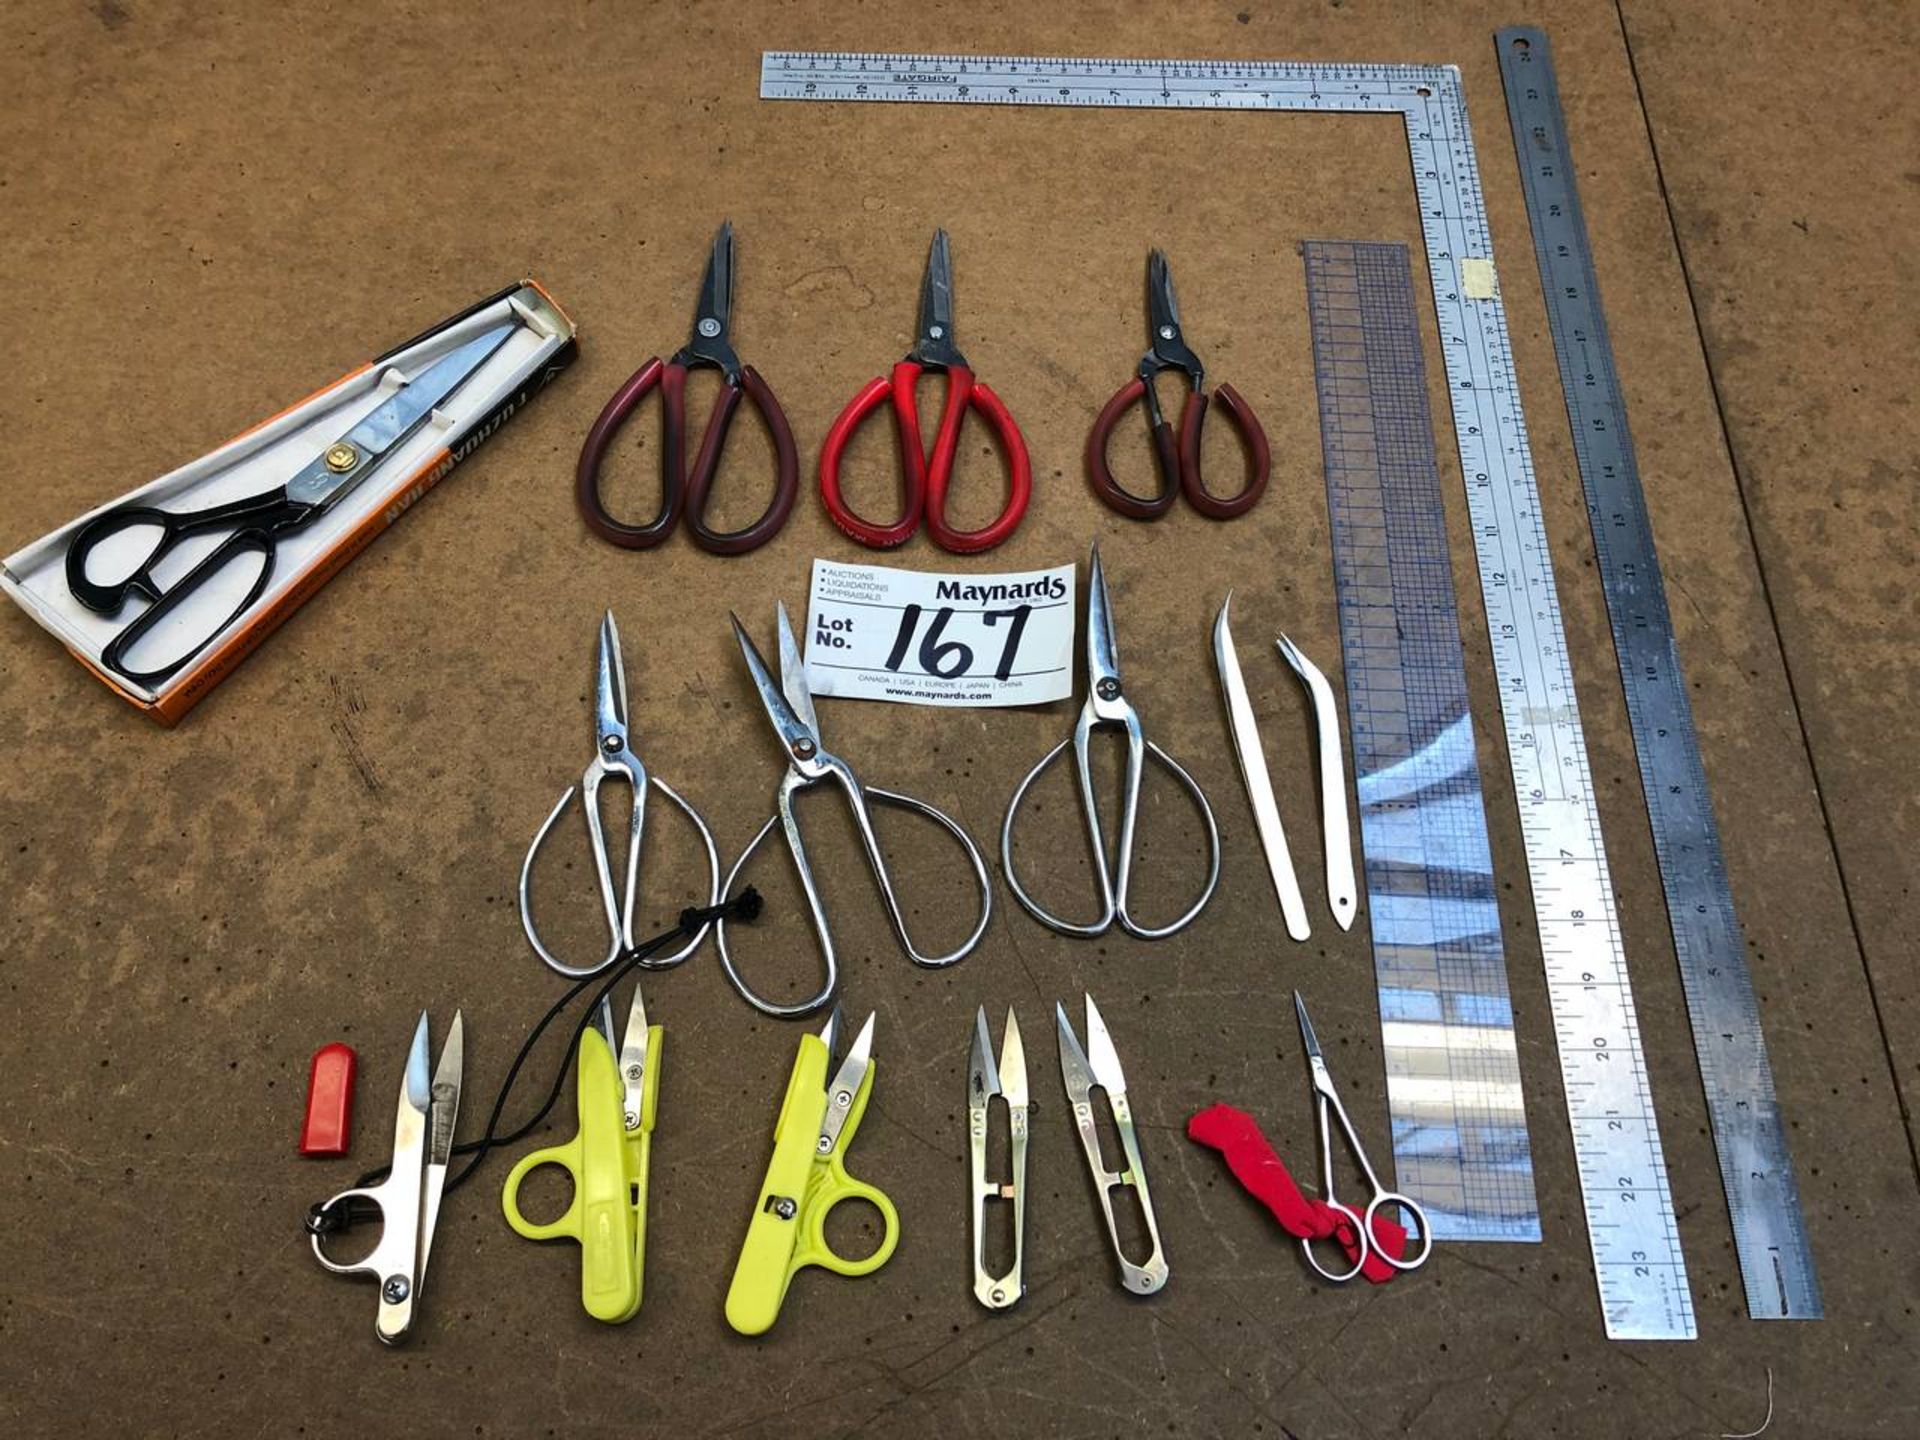 Lot of scissors and rulers